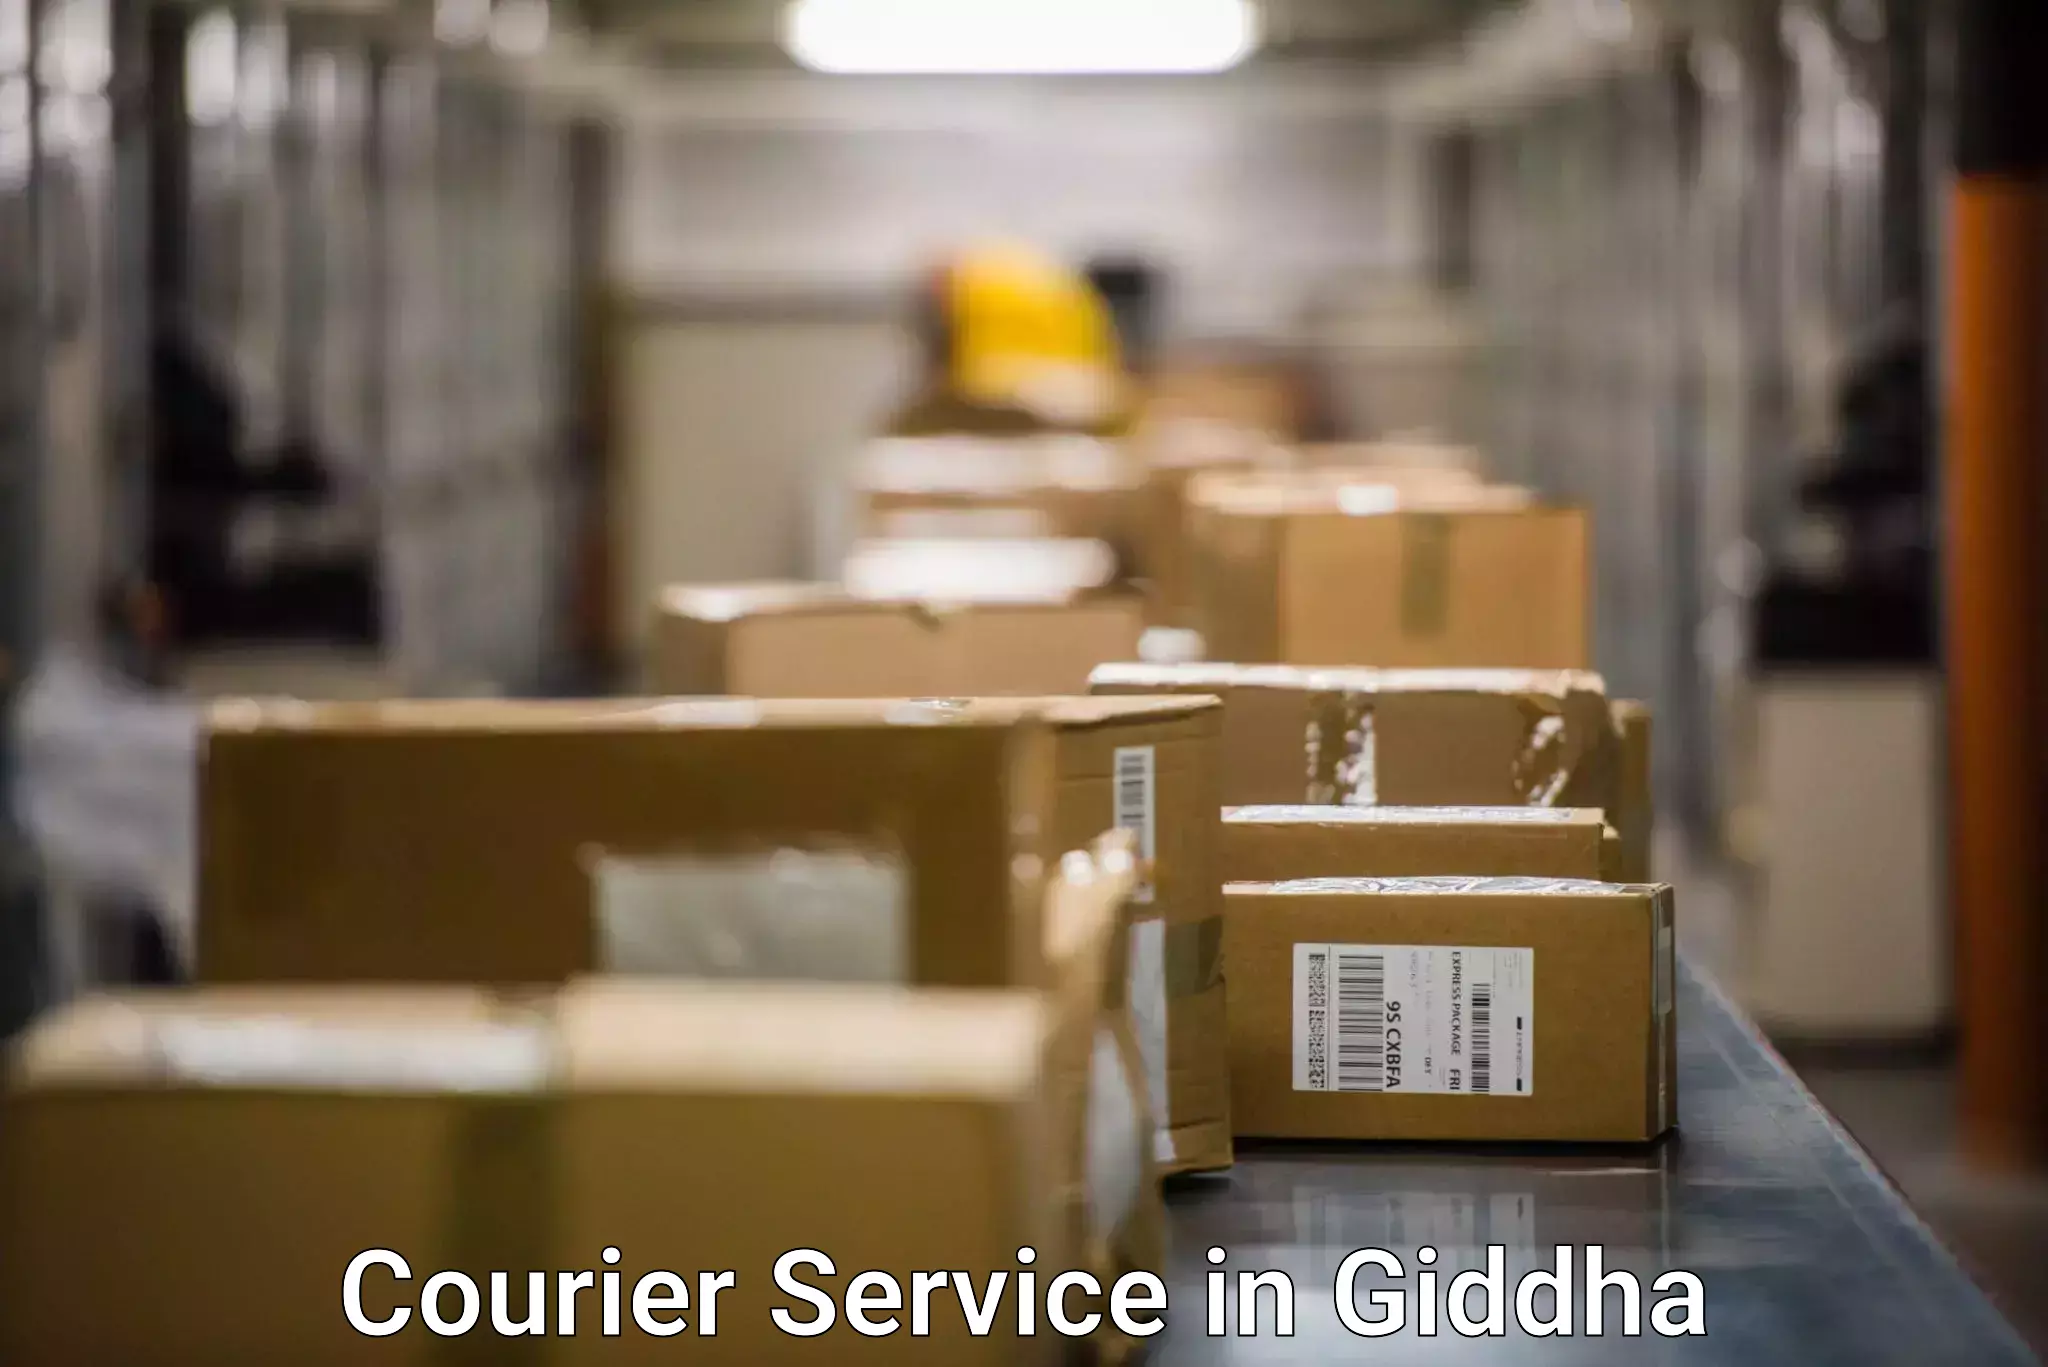 Overnight delivery services in Giddha